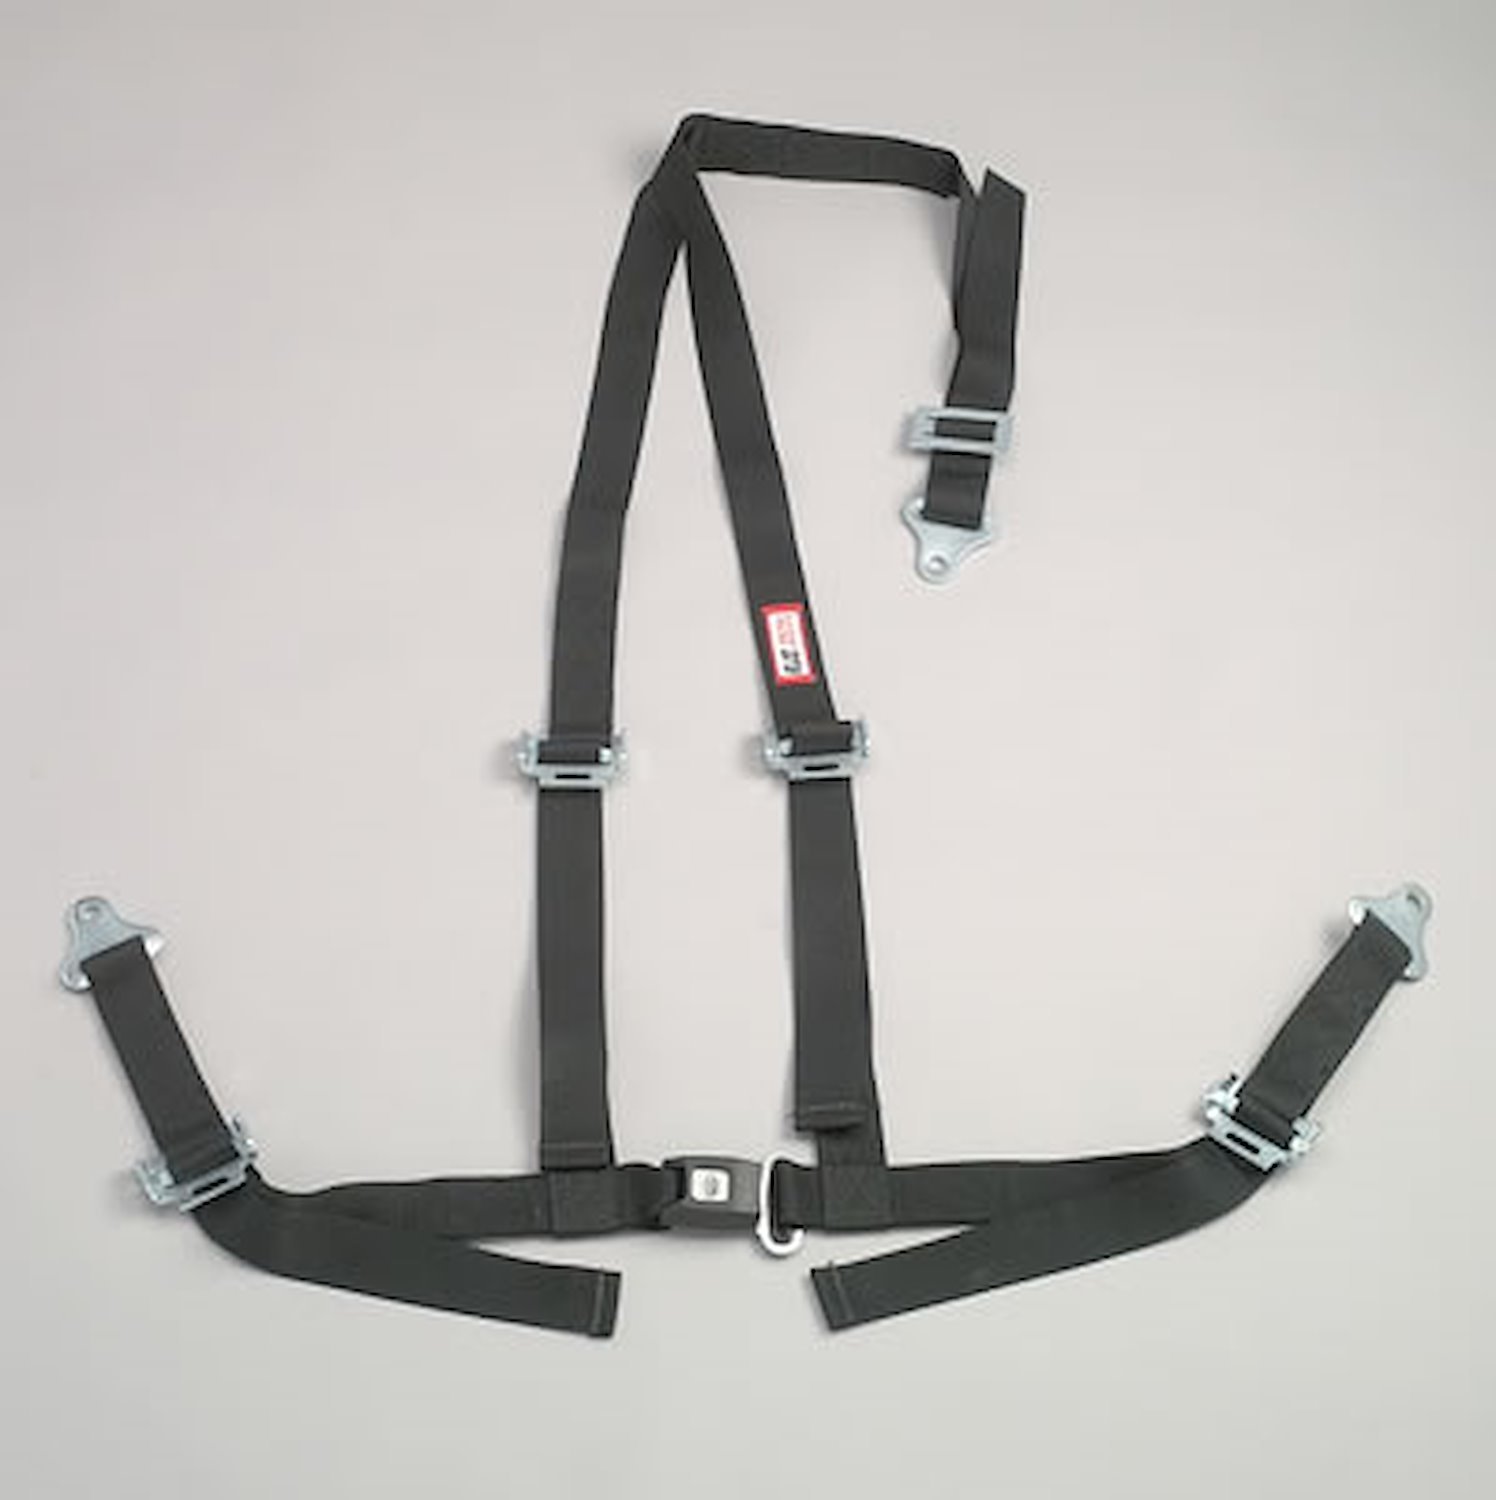 NON-SFI B&T HARNESS 2 PULL UP Lap Belt SNAP 2 S. H. Individual ROLL BAR Mount WRAP/SNAP w/STERNUM STRAP RED